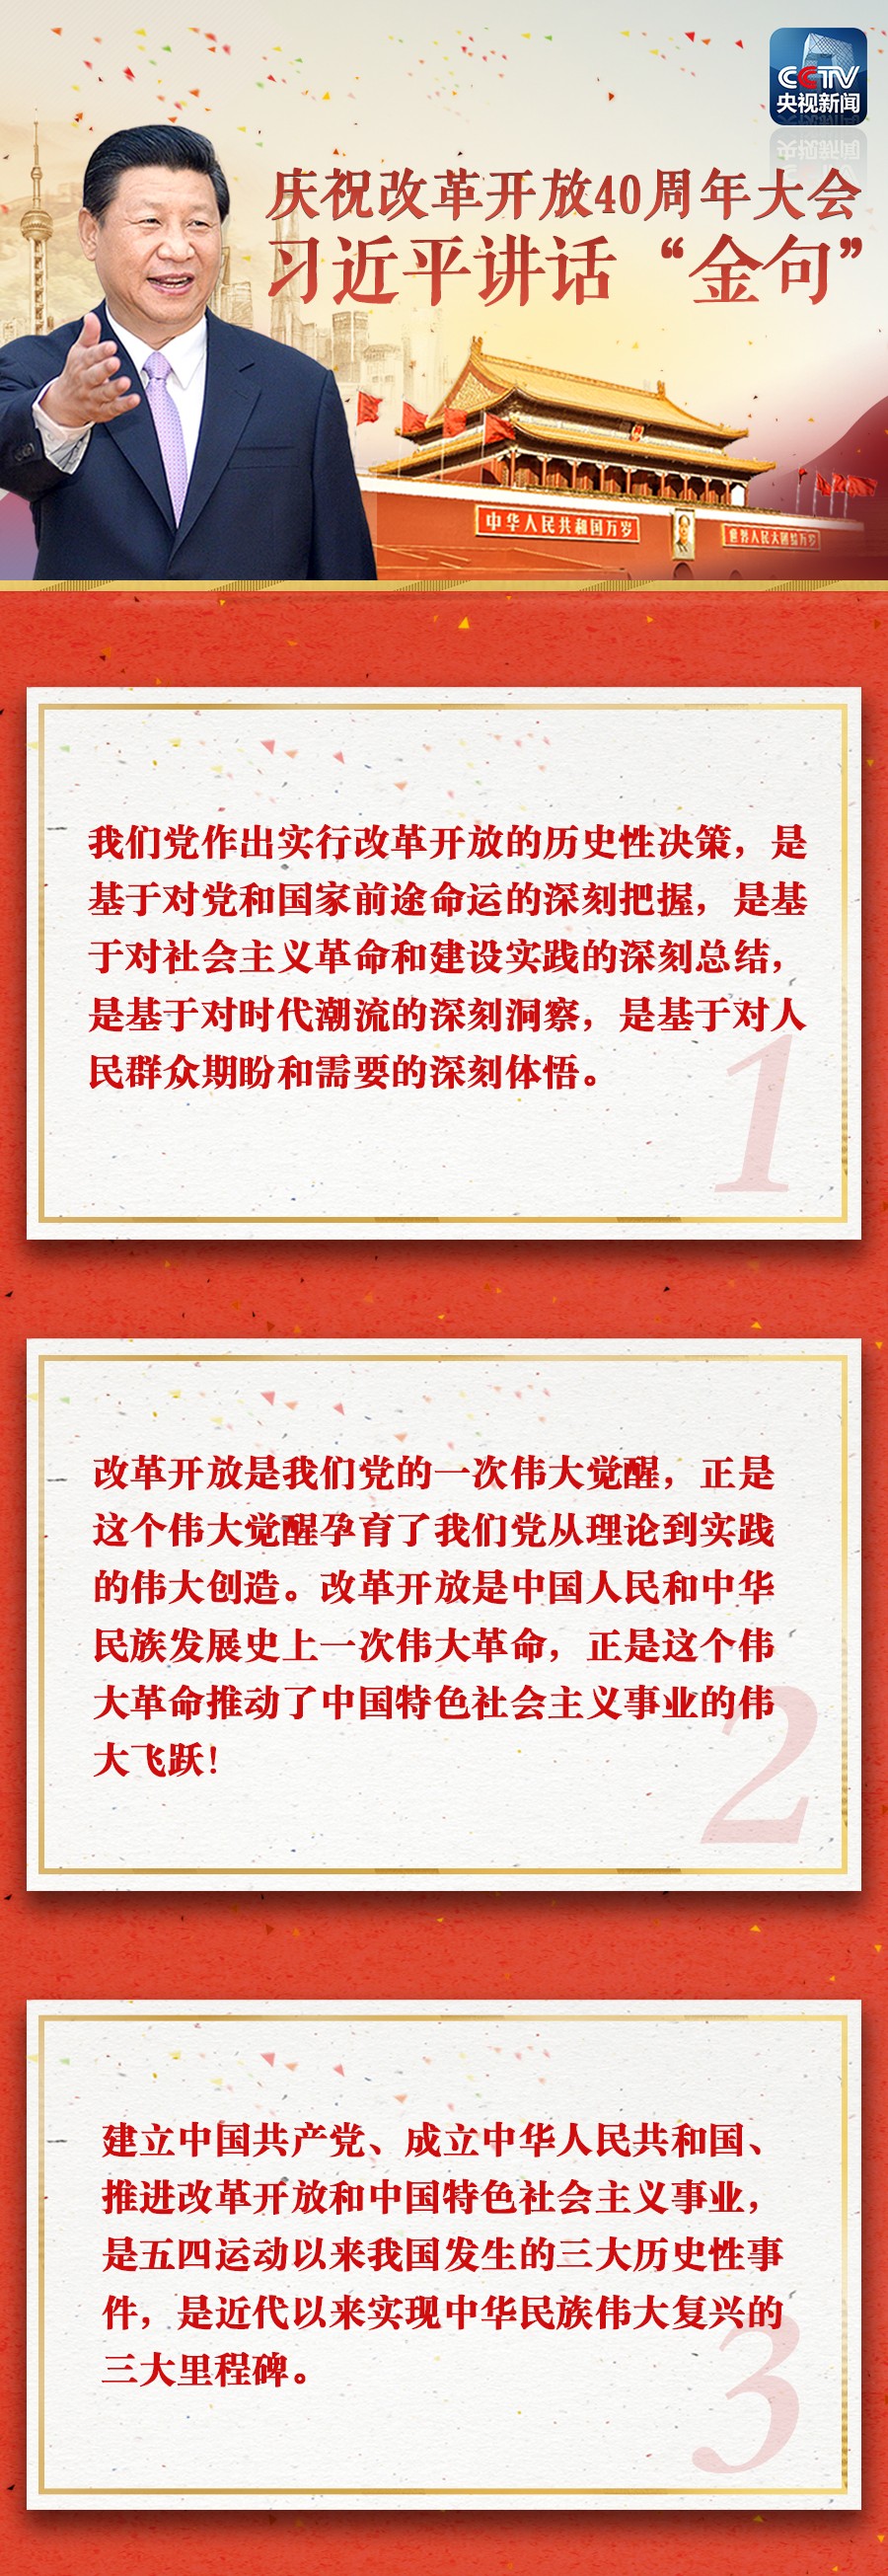 Celebrate the 40th anniversary of reform and opening up! President Xi's Important Speeches Edition + Golden Sentences are Coming